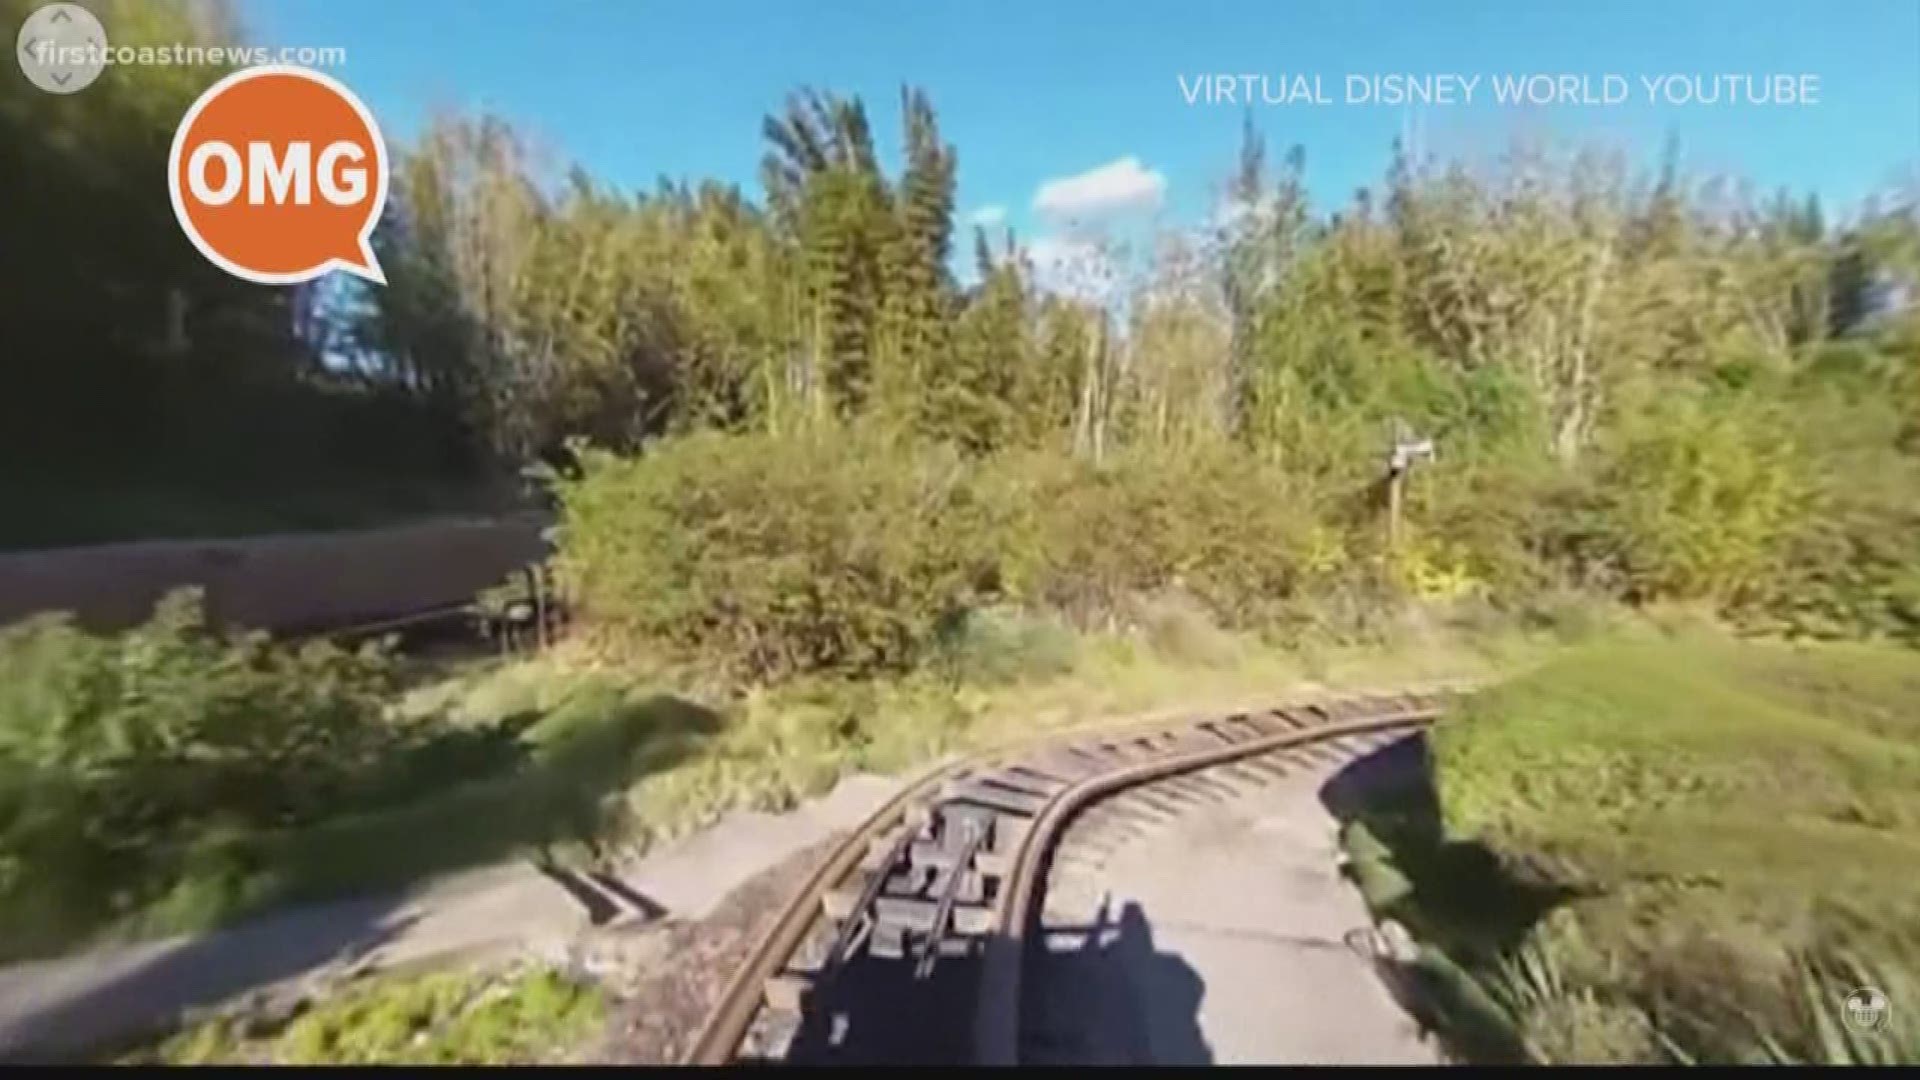 You and your kids can take a *virtual* trip to Disney World from the comfort of your home.